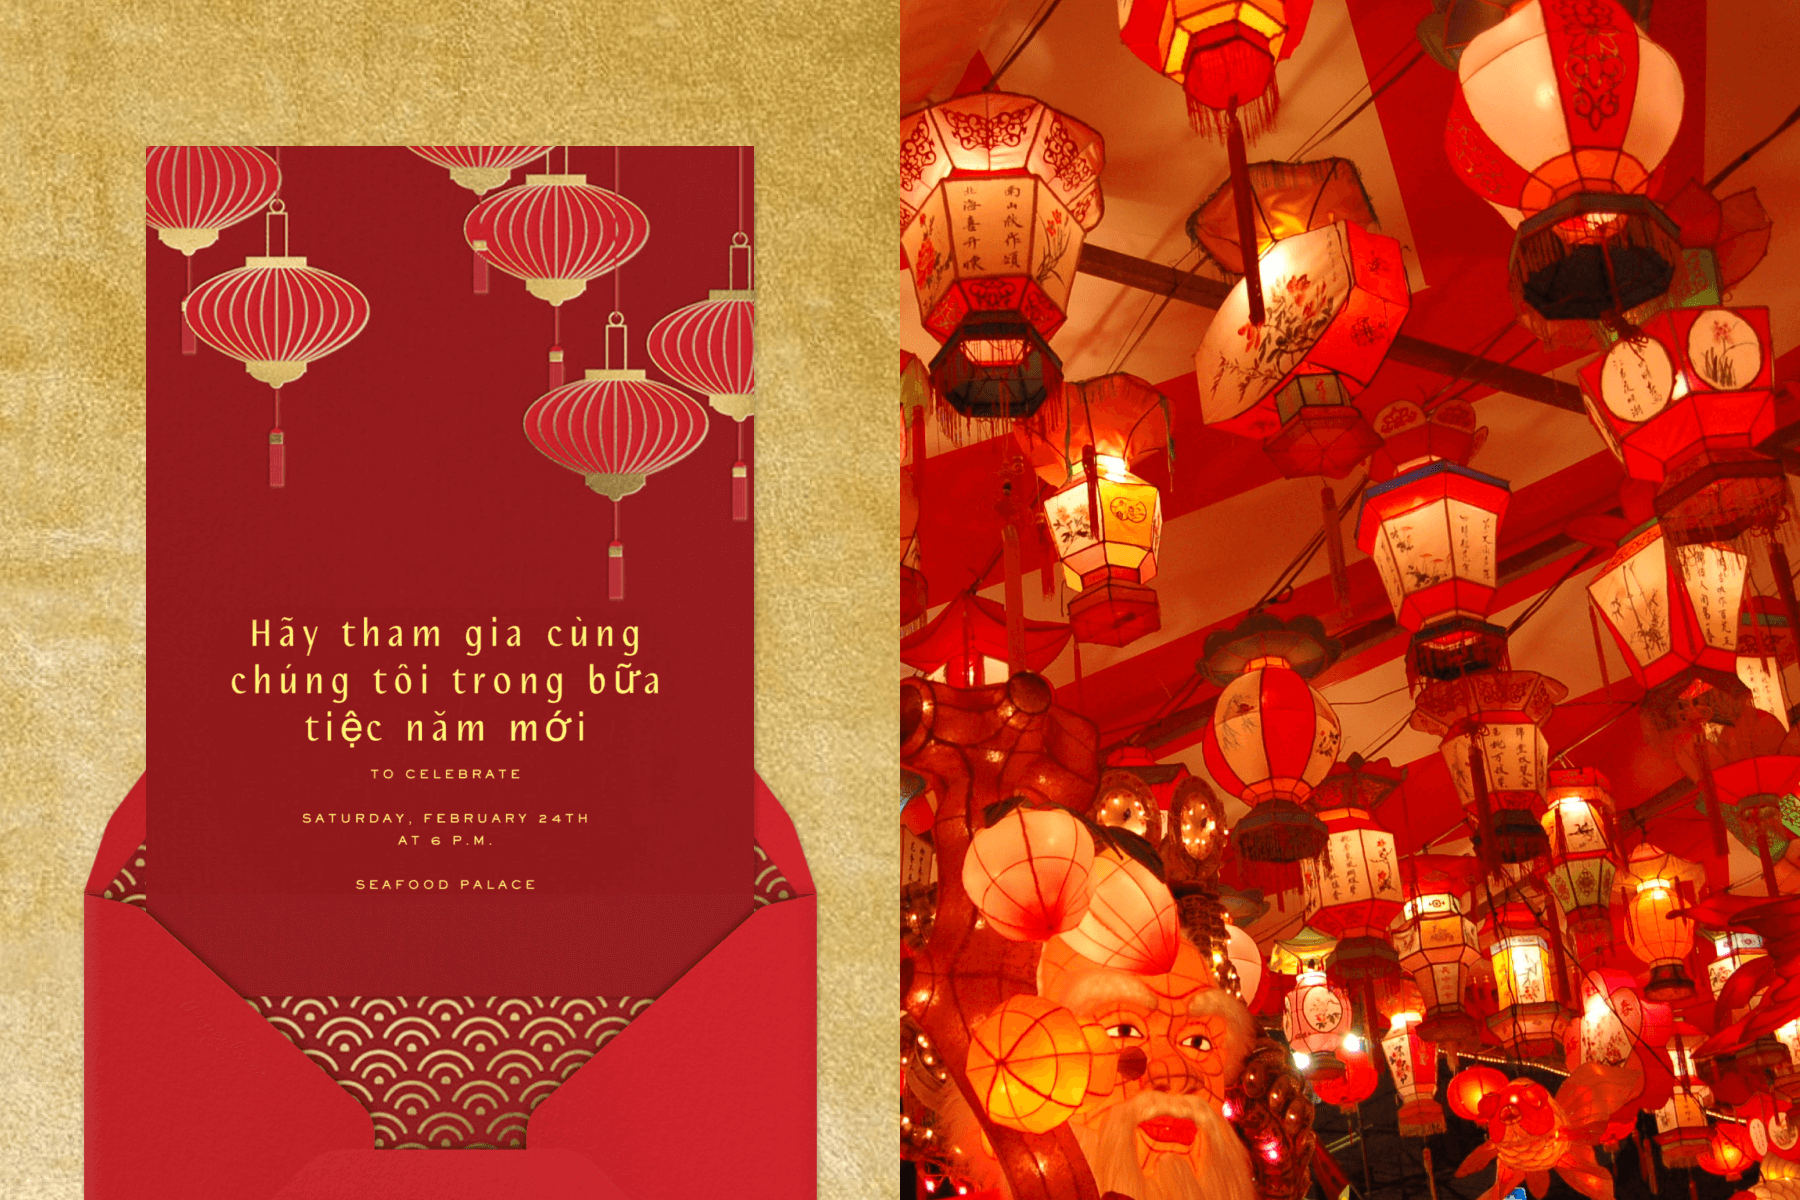 A red invitation with hanging lanterns; red paper lanterns hanging from the ceiling.